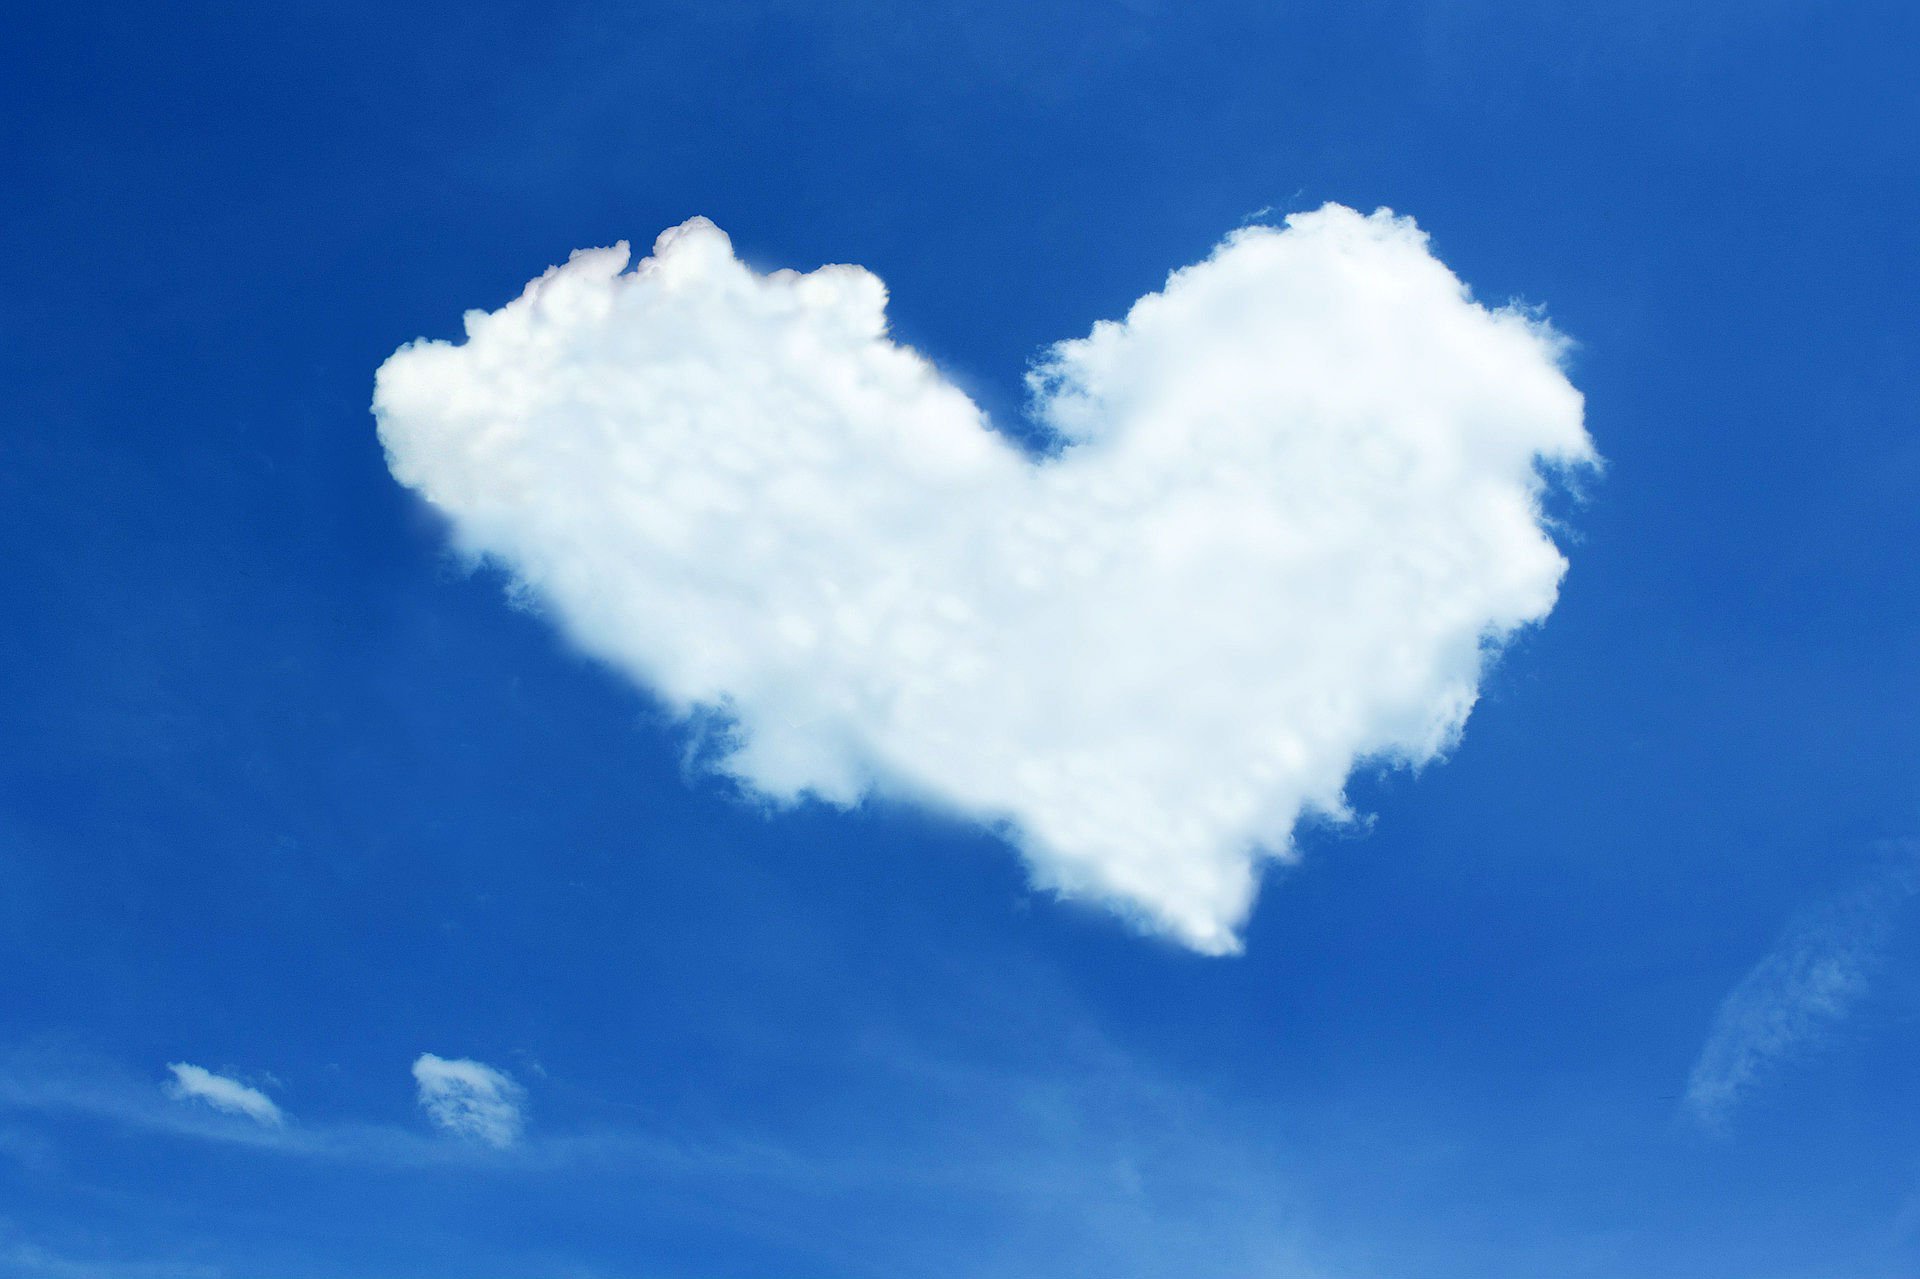 valentines, Day, Mood, Love, Holiday, Valentine, Heart, Clouds, Cloud, Sky Wallpaper